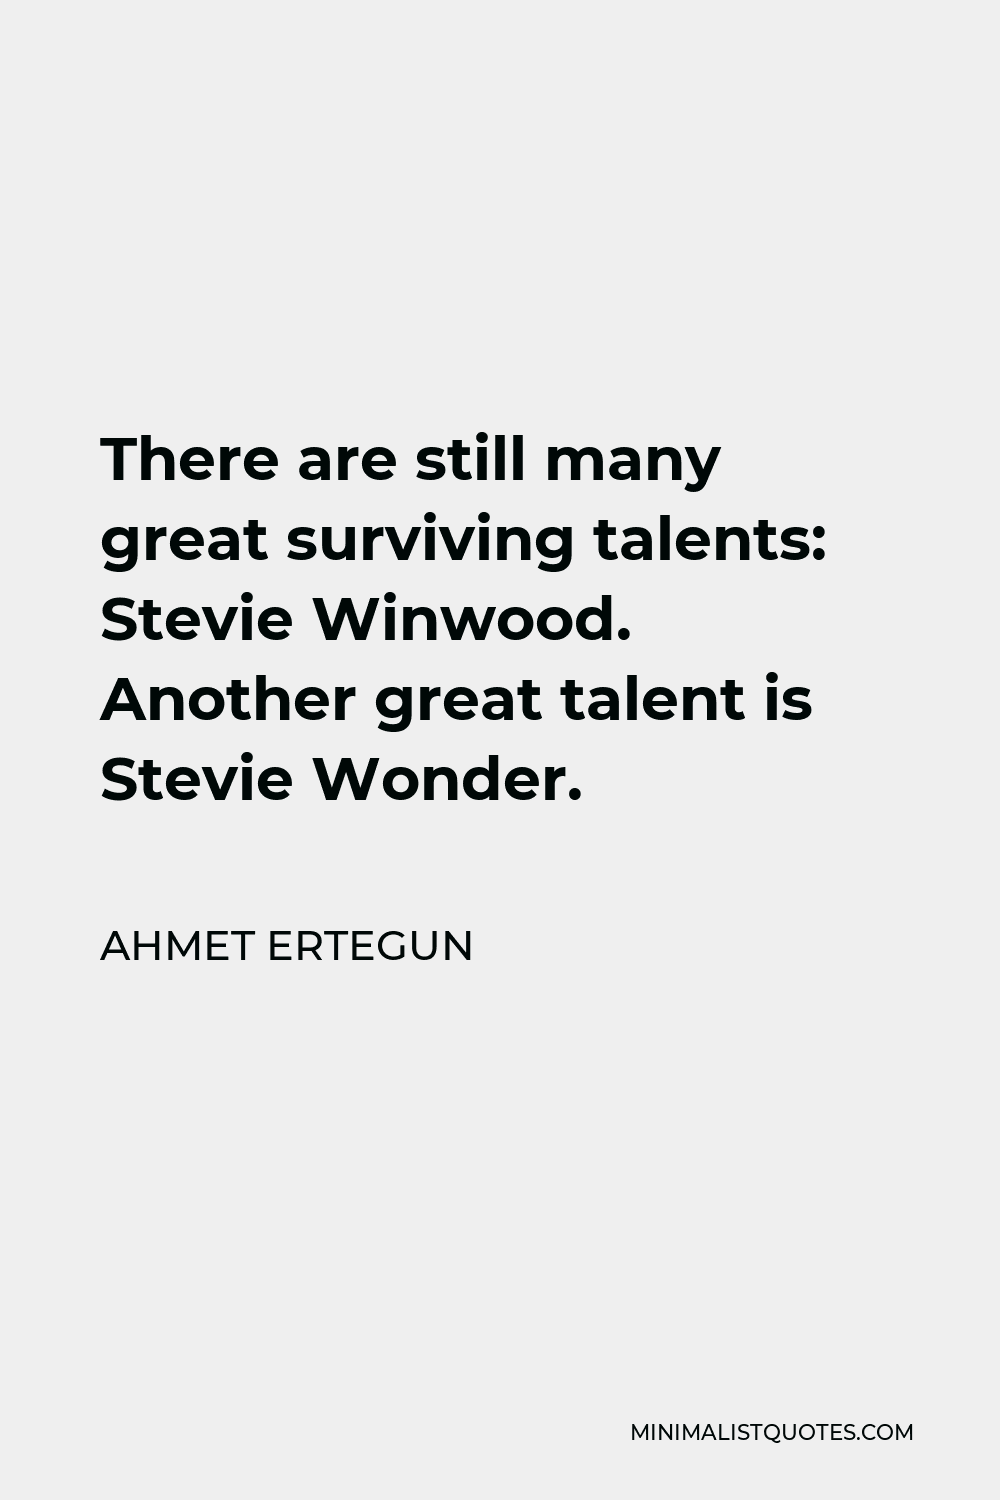 Ahmet Ertegun Quote - There are still many great surviving talents: Stevie Winwood. Another great talent is Stevie Wonder.